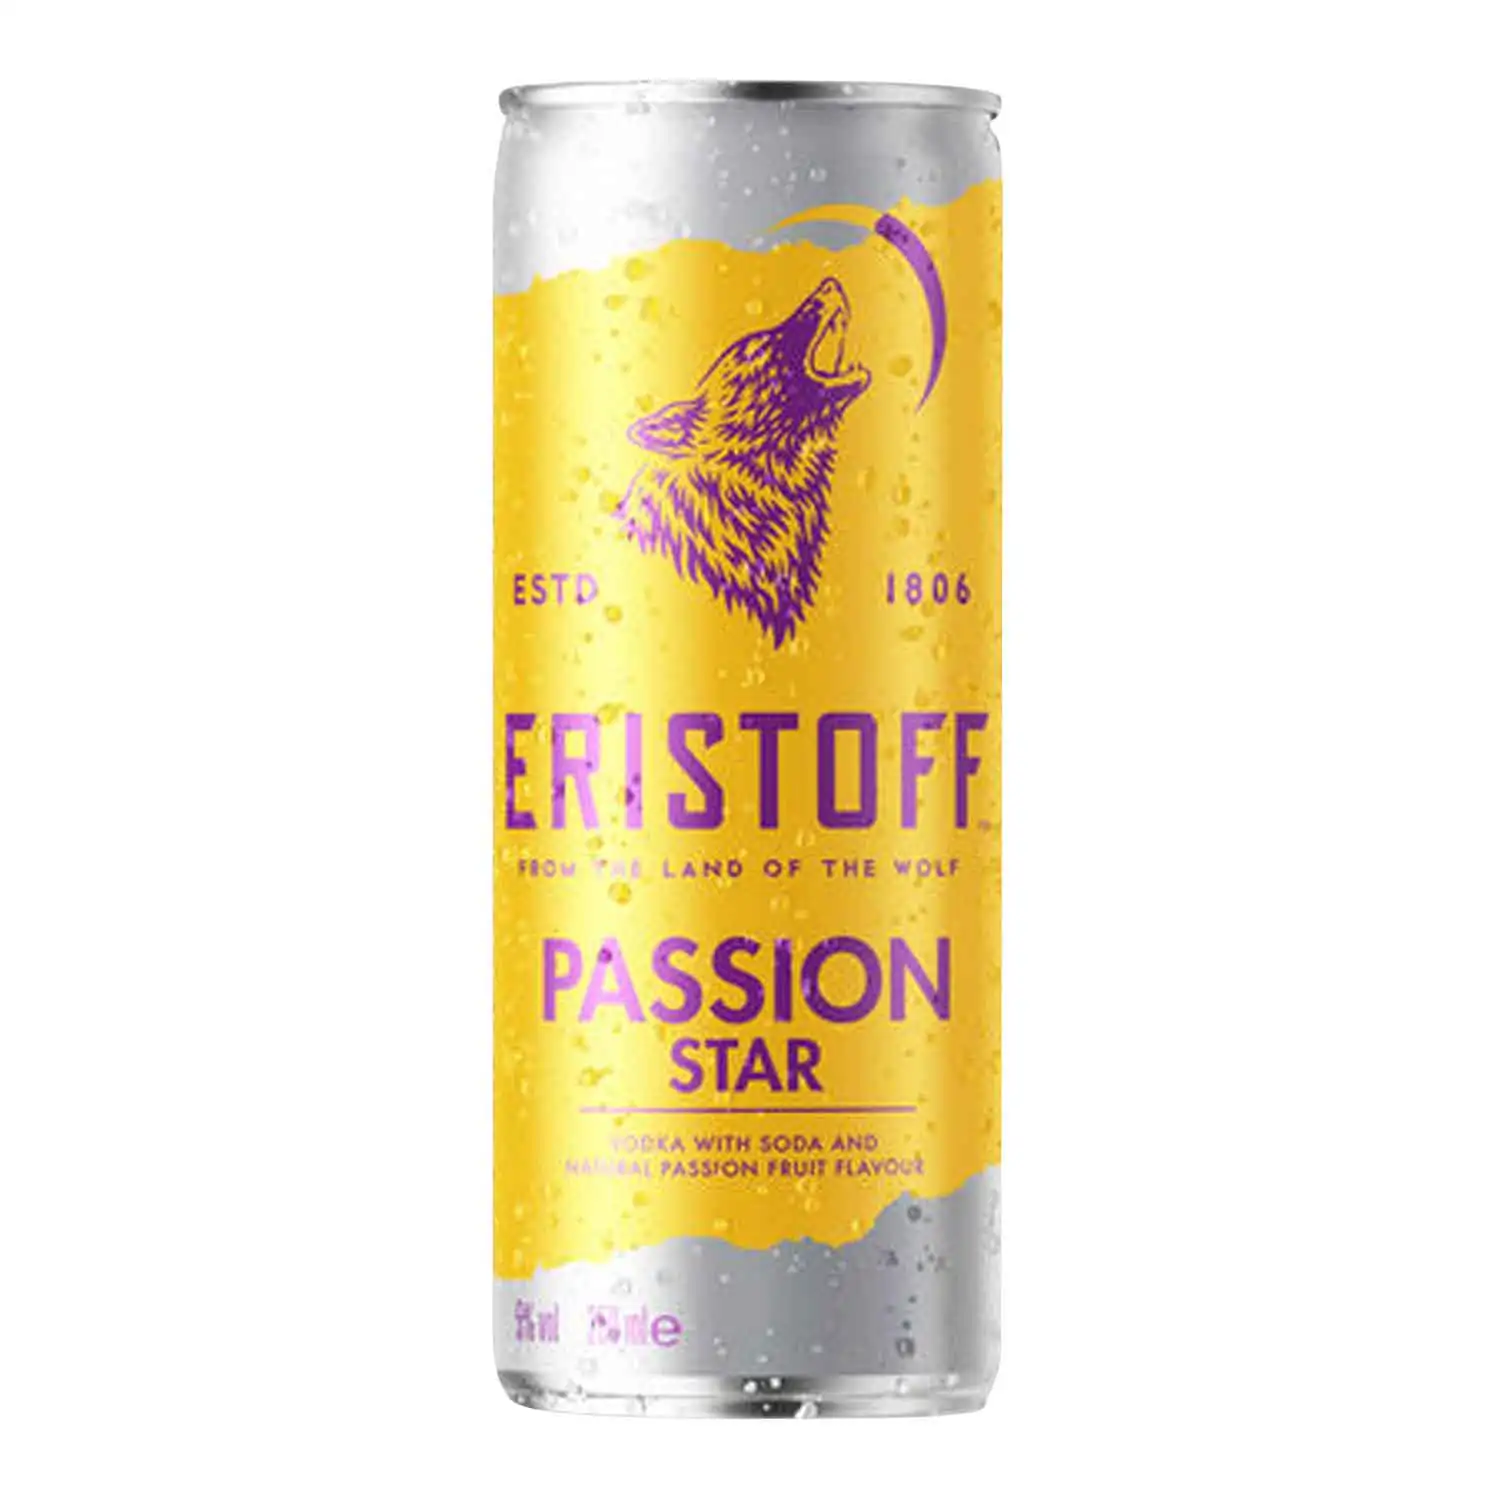 Eristoff passion star 25cl Alc 5% - Buy at Real Tobacco